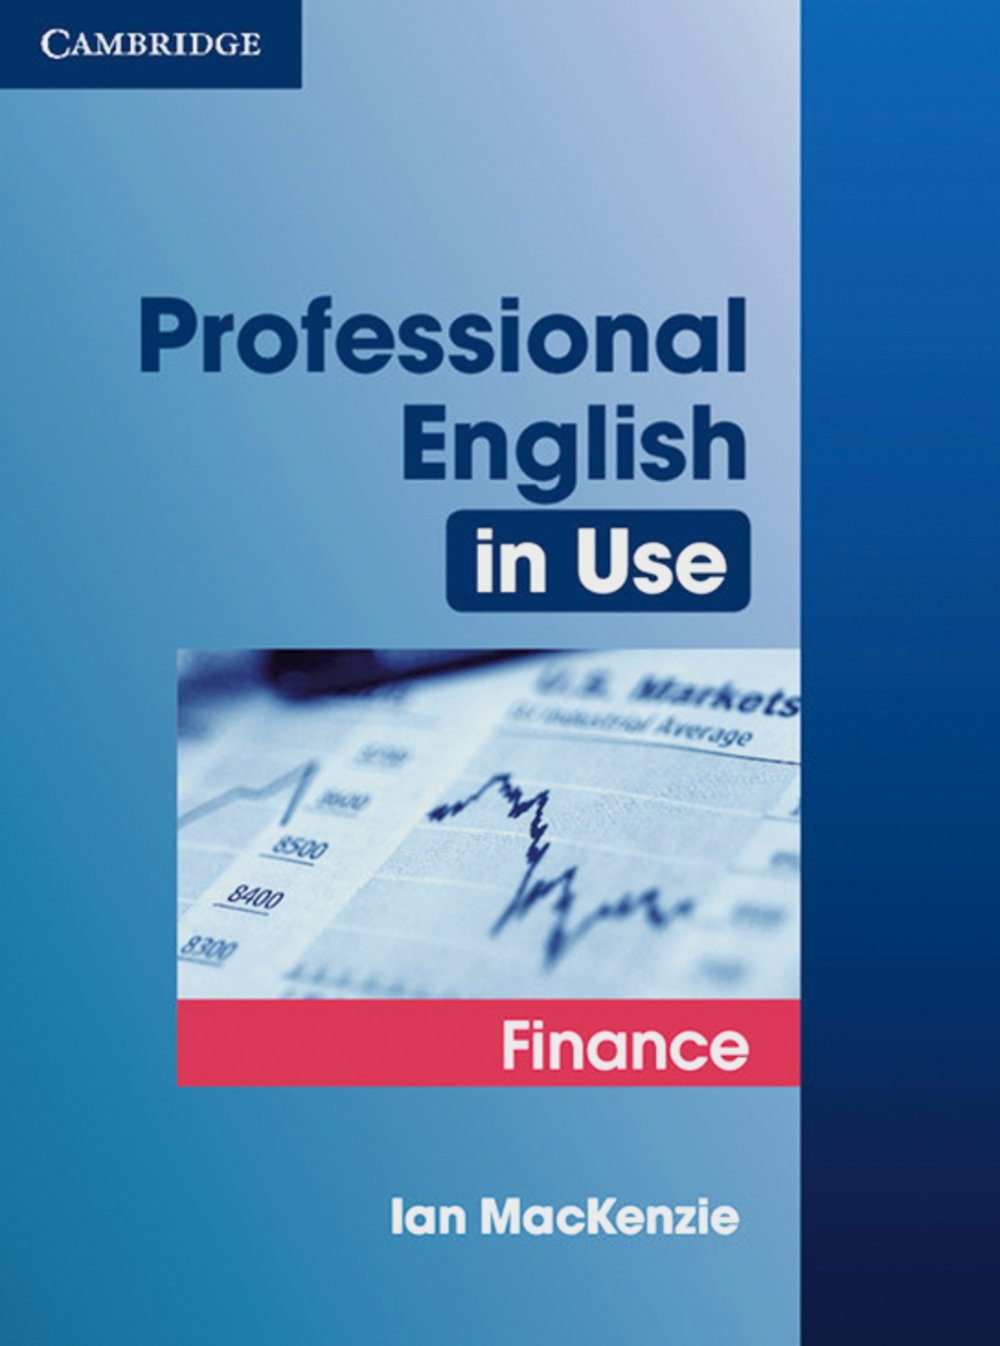 professional-english-in-use-finance 